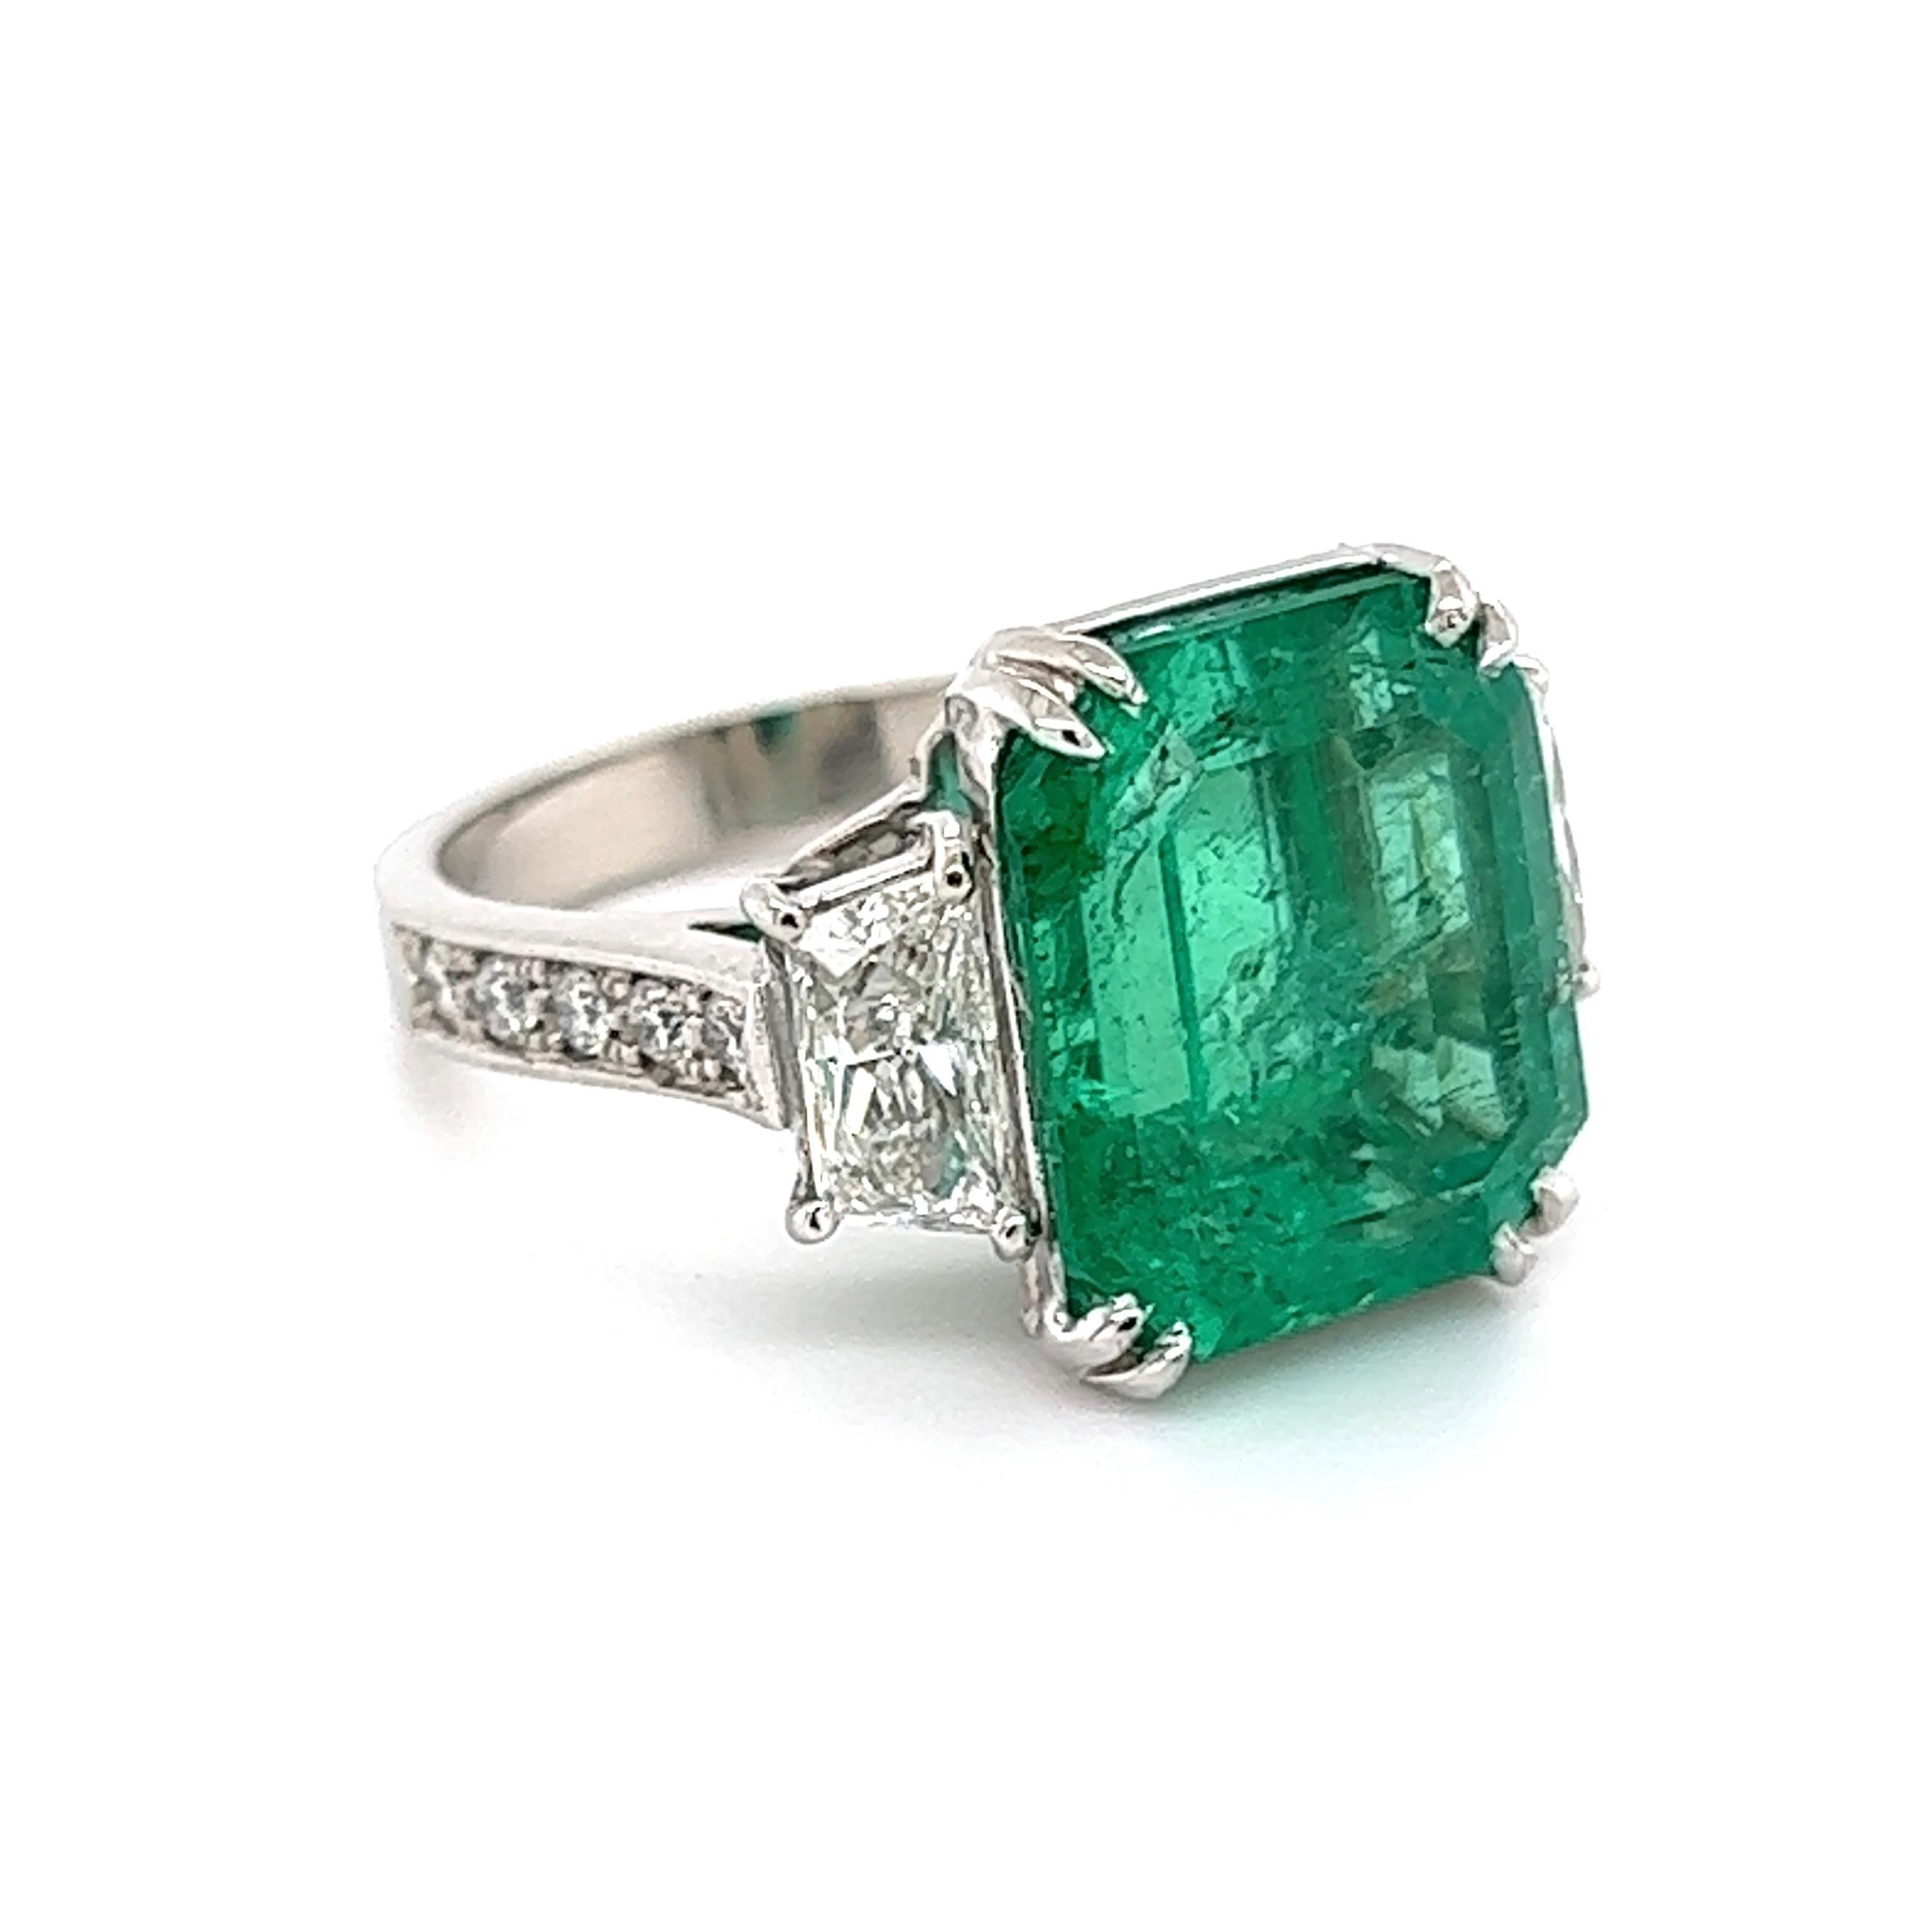 Simply Beautiful! Finely detailed Emerald and Diamond Three-Stone Trilogy Platinum Cocktail Ring, center securely nestled with an Emerald-Cut Emerald weighing approx. 9.70 Carat with a Diamond on both sides and including side Diamonds enhancing the